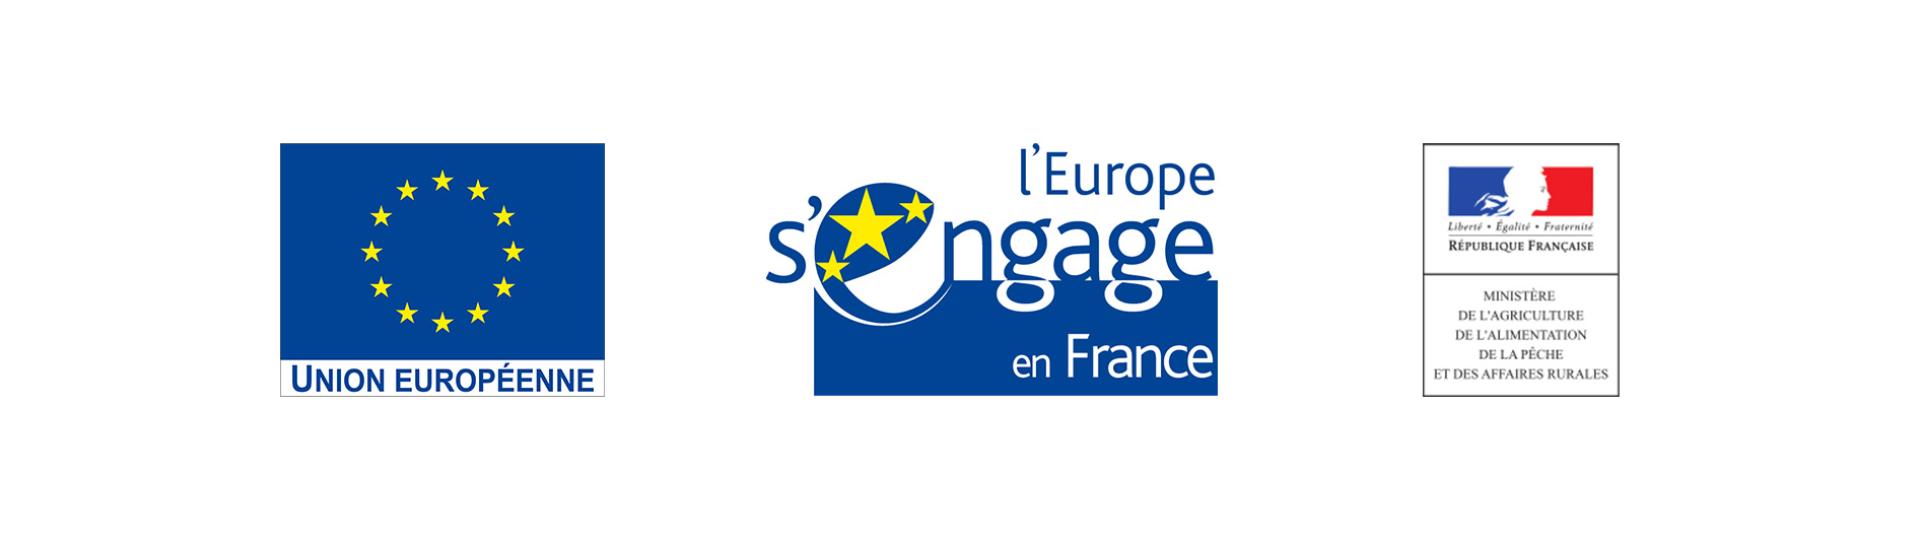 logos UE - L'Europe S'engage - ministère Agriculture